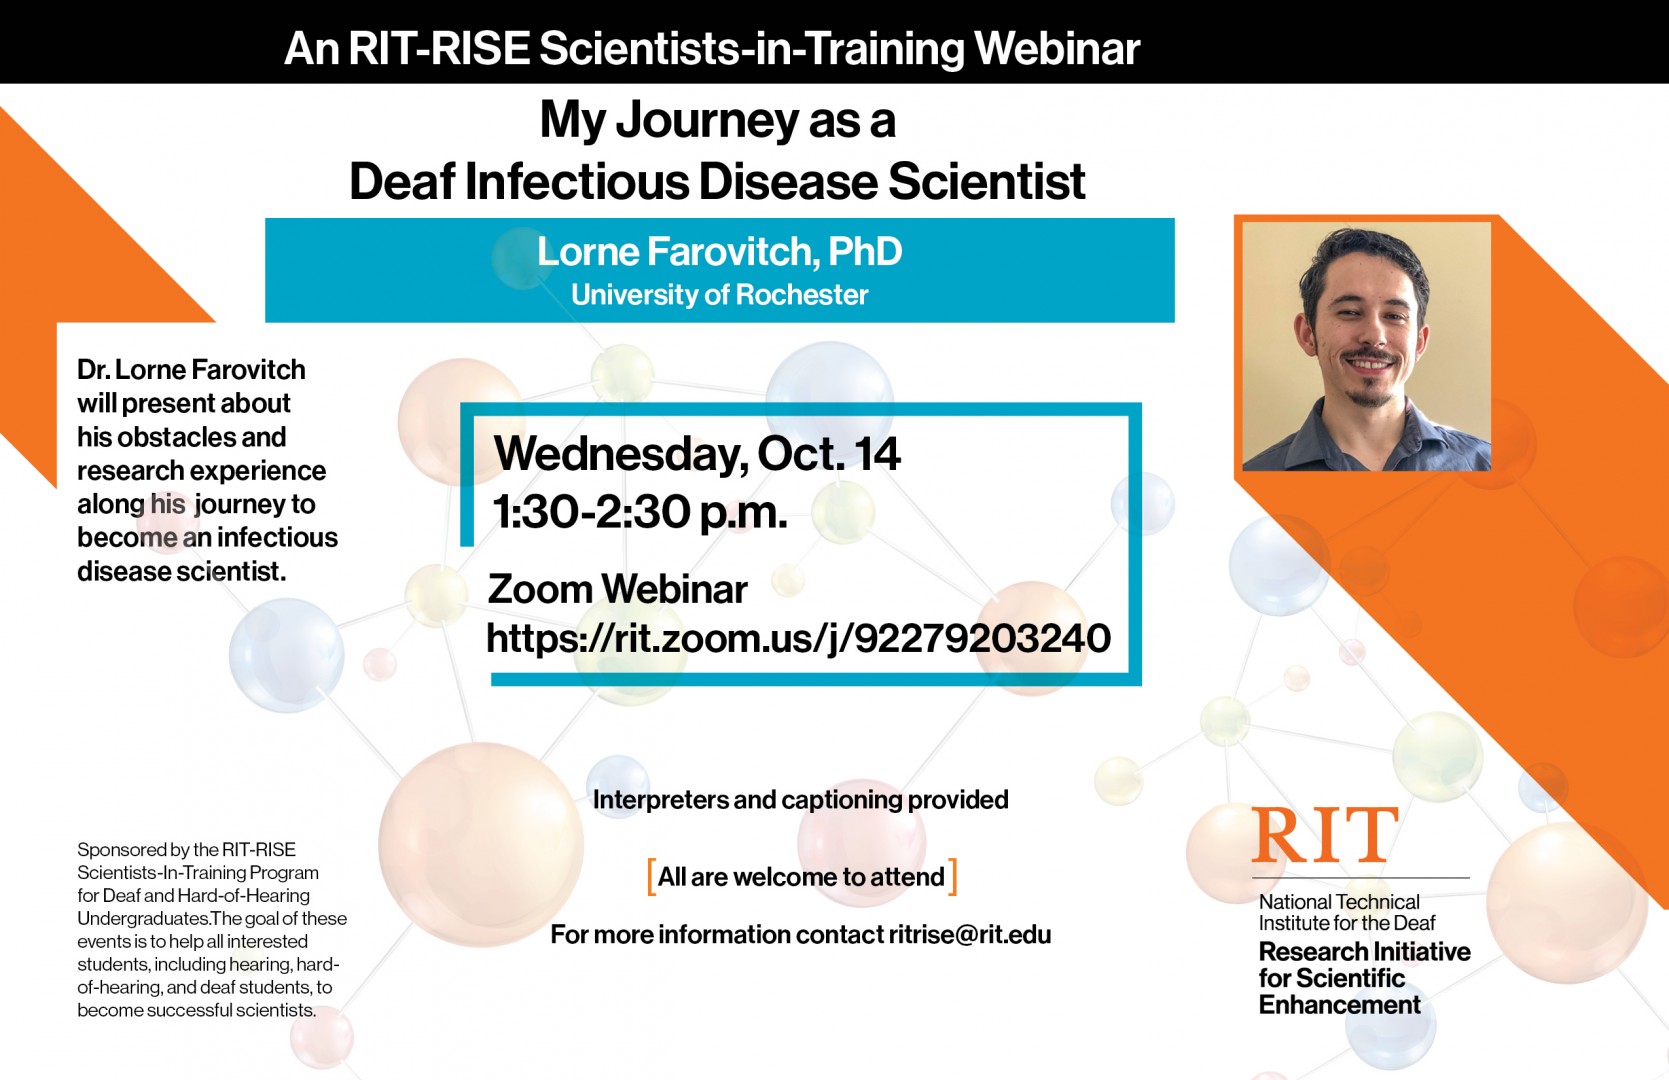  Poster with orange and black graphics; photo of Dr. Lorne Farovitch on right - white-skinned, brown short wavey hair,  light blue-grey shirt; Text reads: An RIT-RISE Scientists-in-Training Webinar My Journey as a Deaf Infectious Disease Scientist Lorne Farovitch, PhD, University of Rochester Dr. Lorne Farovitch will present about his obstacles and research experience along his journey to become an infectious disease scientist.   Wednesday, Oct. 14,  1:30-2:30pm Zoom Webinar http://rit.zoom.us/j/92279203240